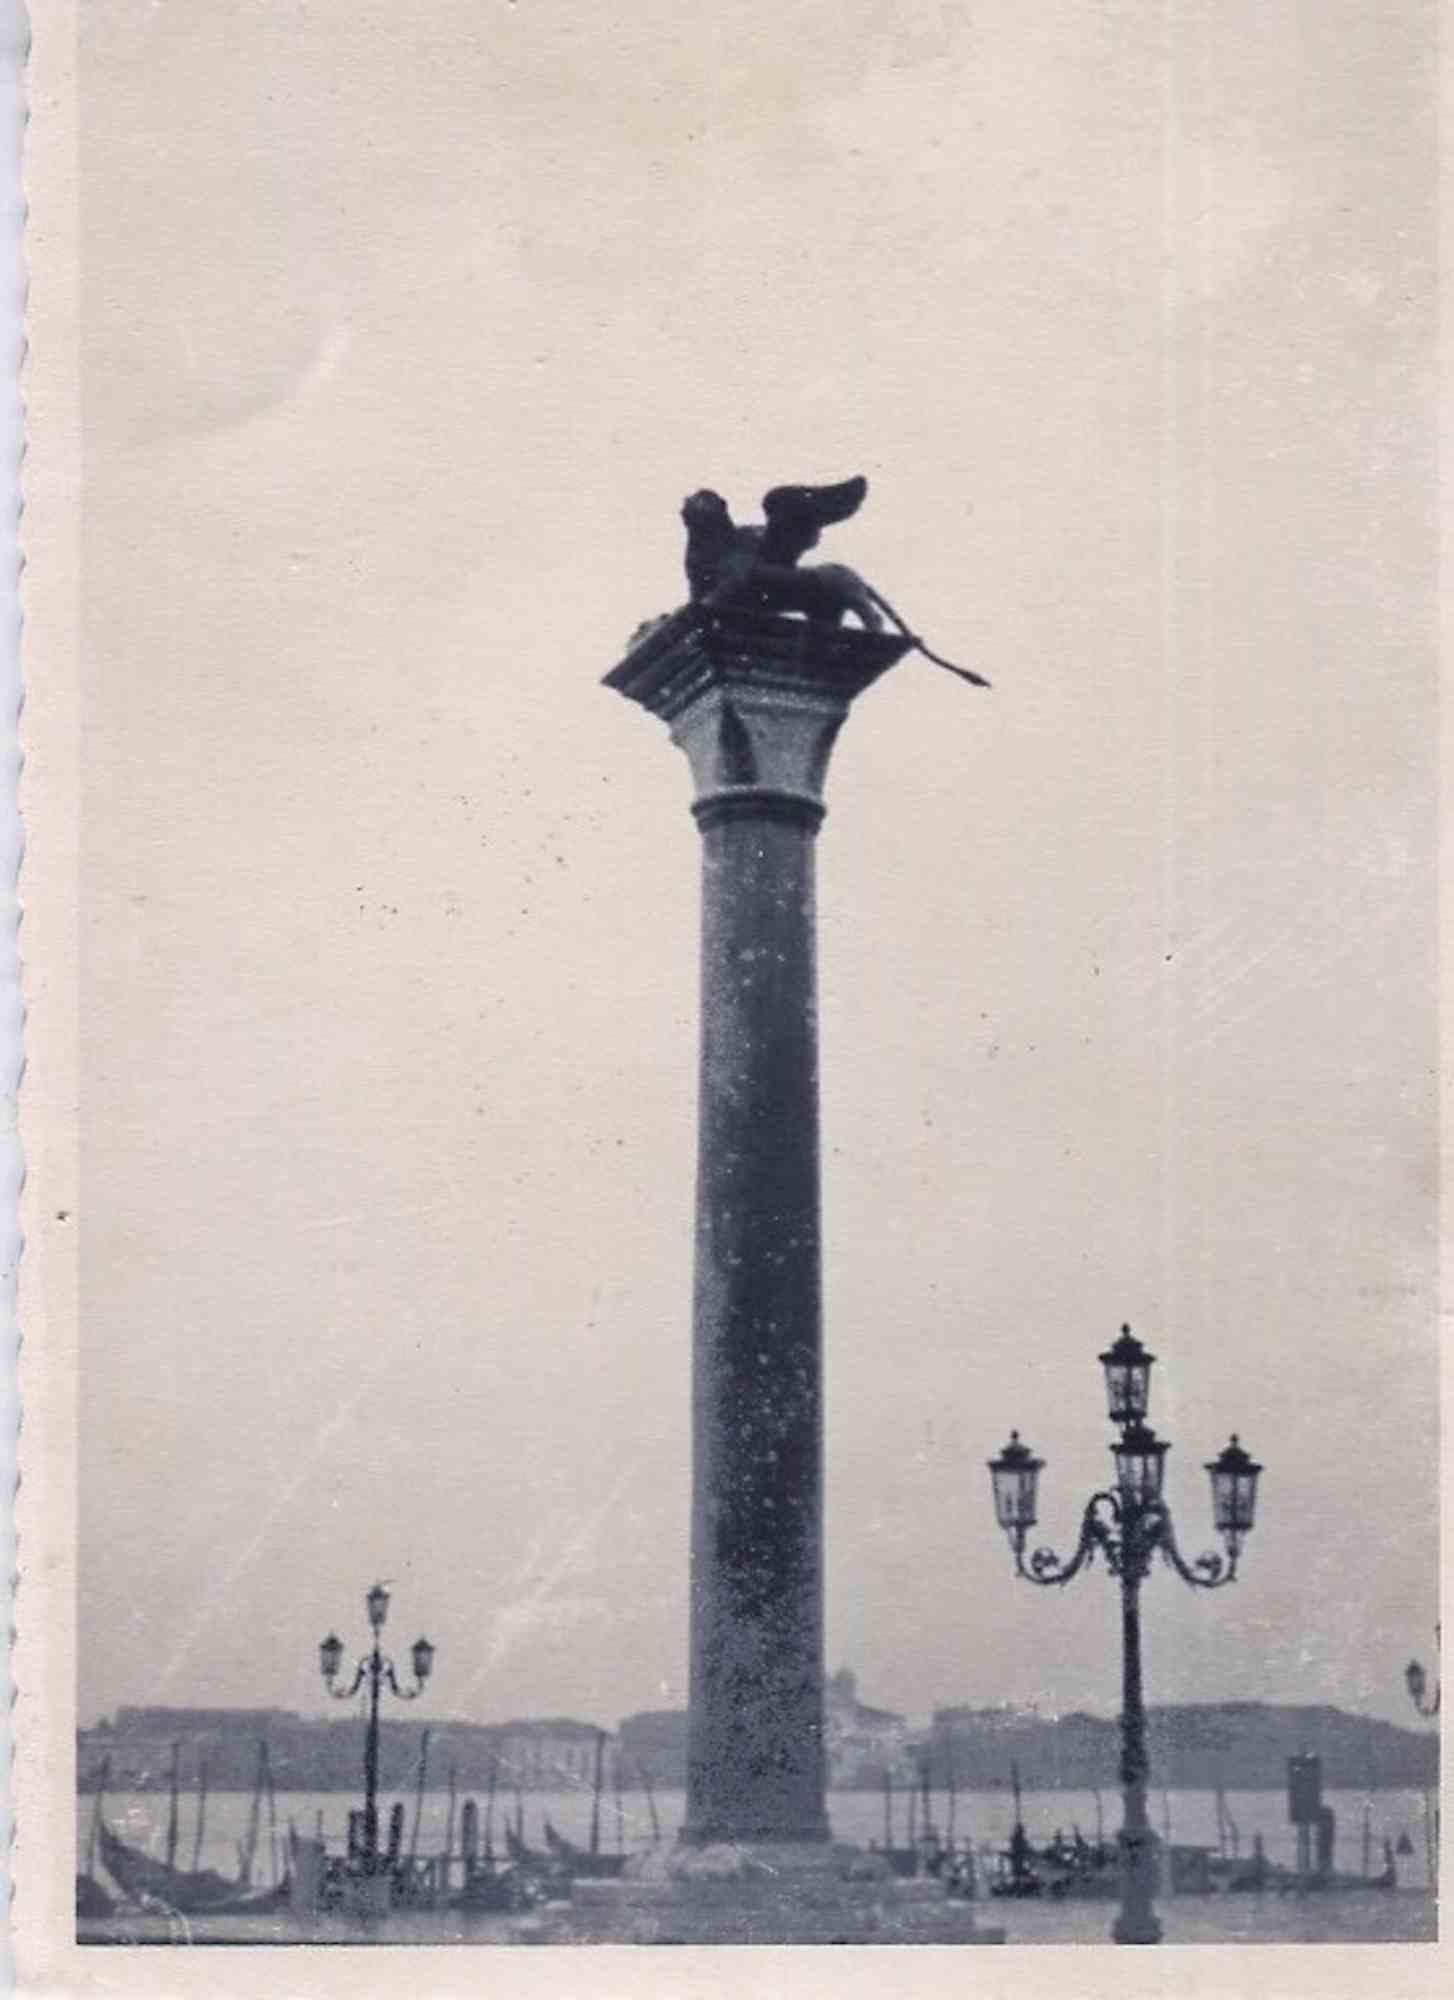 Unknown Figurative Photograph - Old days Photo - Column in San Marco Venice - Vintage Photo - mid-20th Century